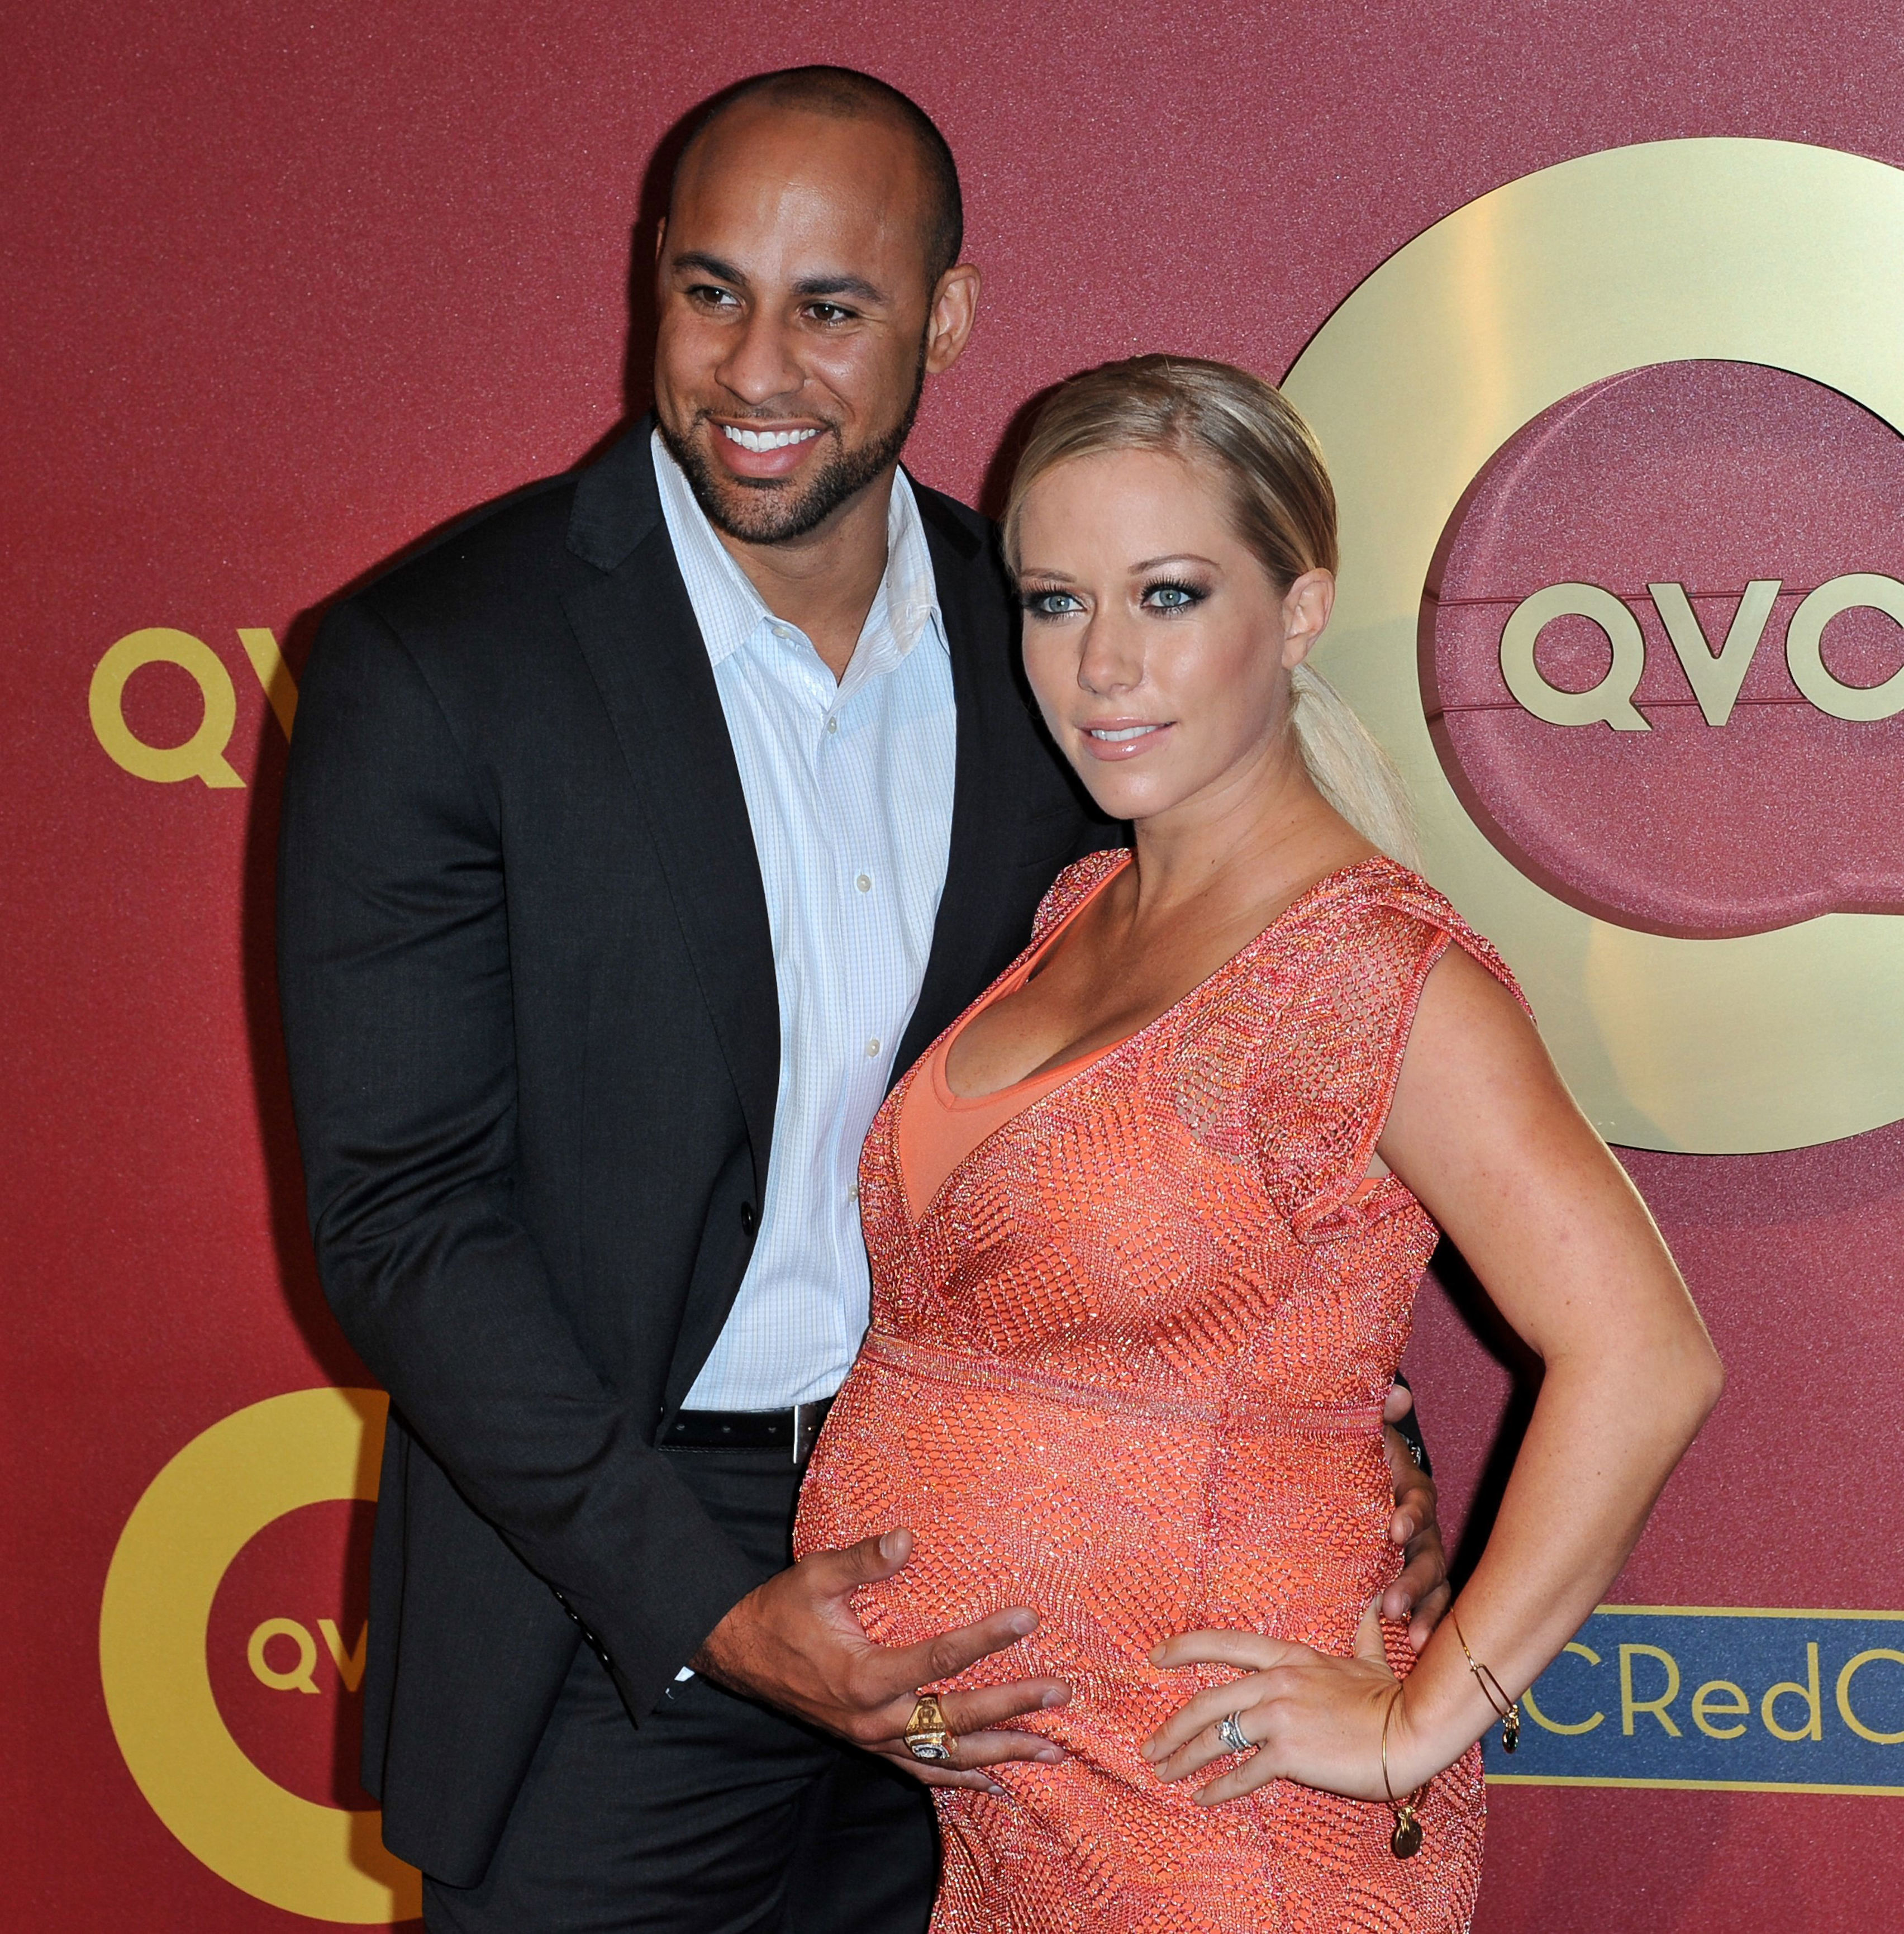 <p>It was one of the more sordid scandals in recent memory: In 2014, Hank Baskett admitted he screwed up with his wife, <a href="https://www.wonderwall.com/celebrity/profiles/overview/kendra-wilkinson-1087.article">Kendra Wilkinson</a>, but maintained that nothing sexual happened when he went to transgender model Ava London's apartment, despite her claims to the contrary. Kendra -- who was pregnant with daughter Alijah Baskett at the time of the alleged affair -- later revealed she'd contemplated suicide as she struggled to face the scandal. Though the reality TV couple reconciled, their marriage was ultimately doomed: Kendra <a href="https://www.wonderwall.com/celebrity/couples/celebrity-splits-breakups-divorces-2018-3013134.gallery?photoId=184965">filed for divorce</a> in April 2018 and their split was finalized in early 2019.</p>